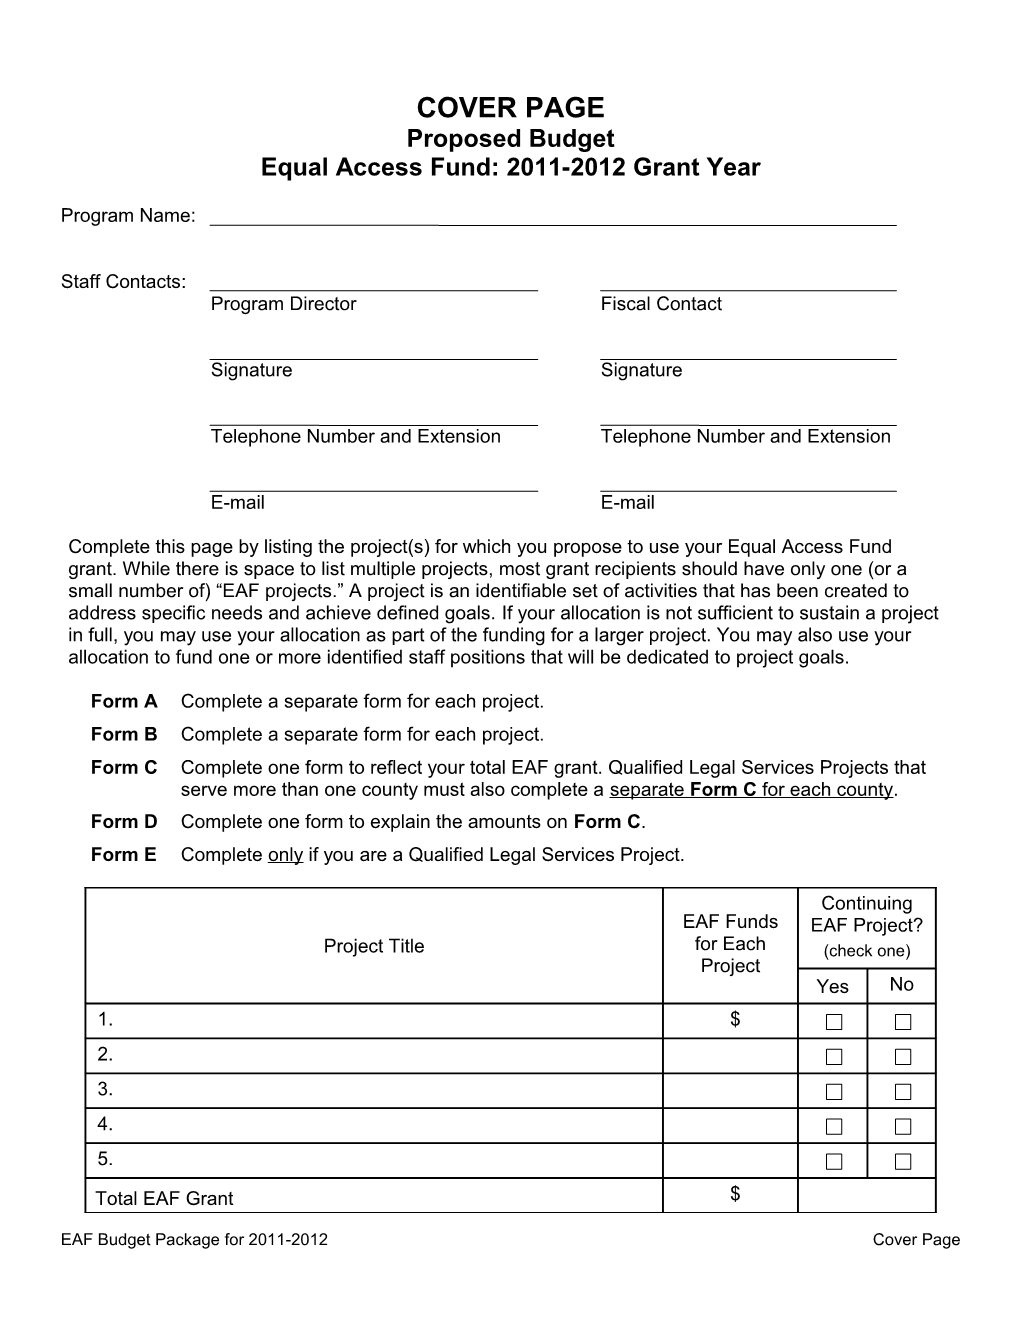 Equal Access Fund:2011-2012 Grant Year